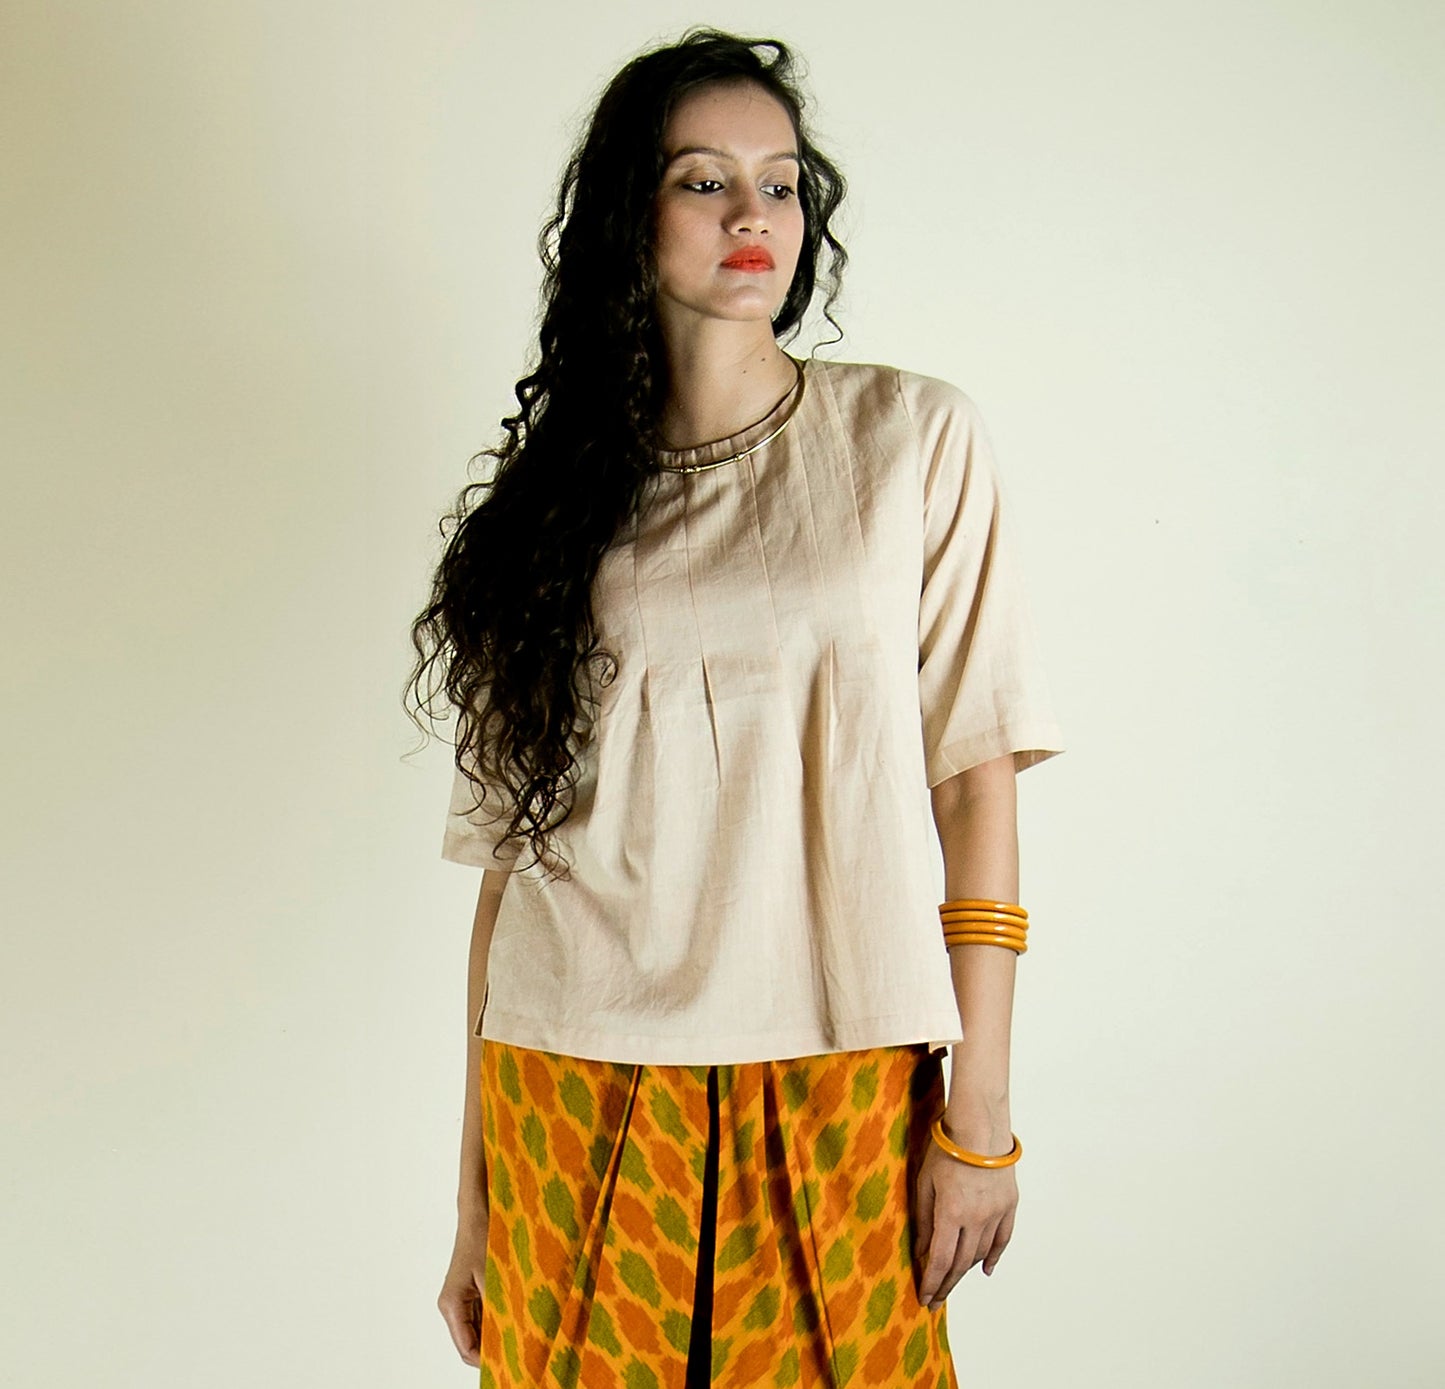 Image of woman in a light beige top paired with yellow ikkat dhoti